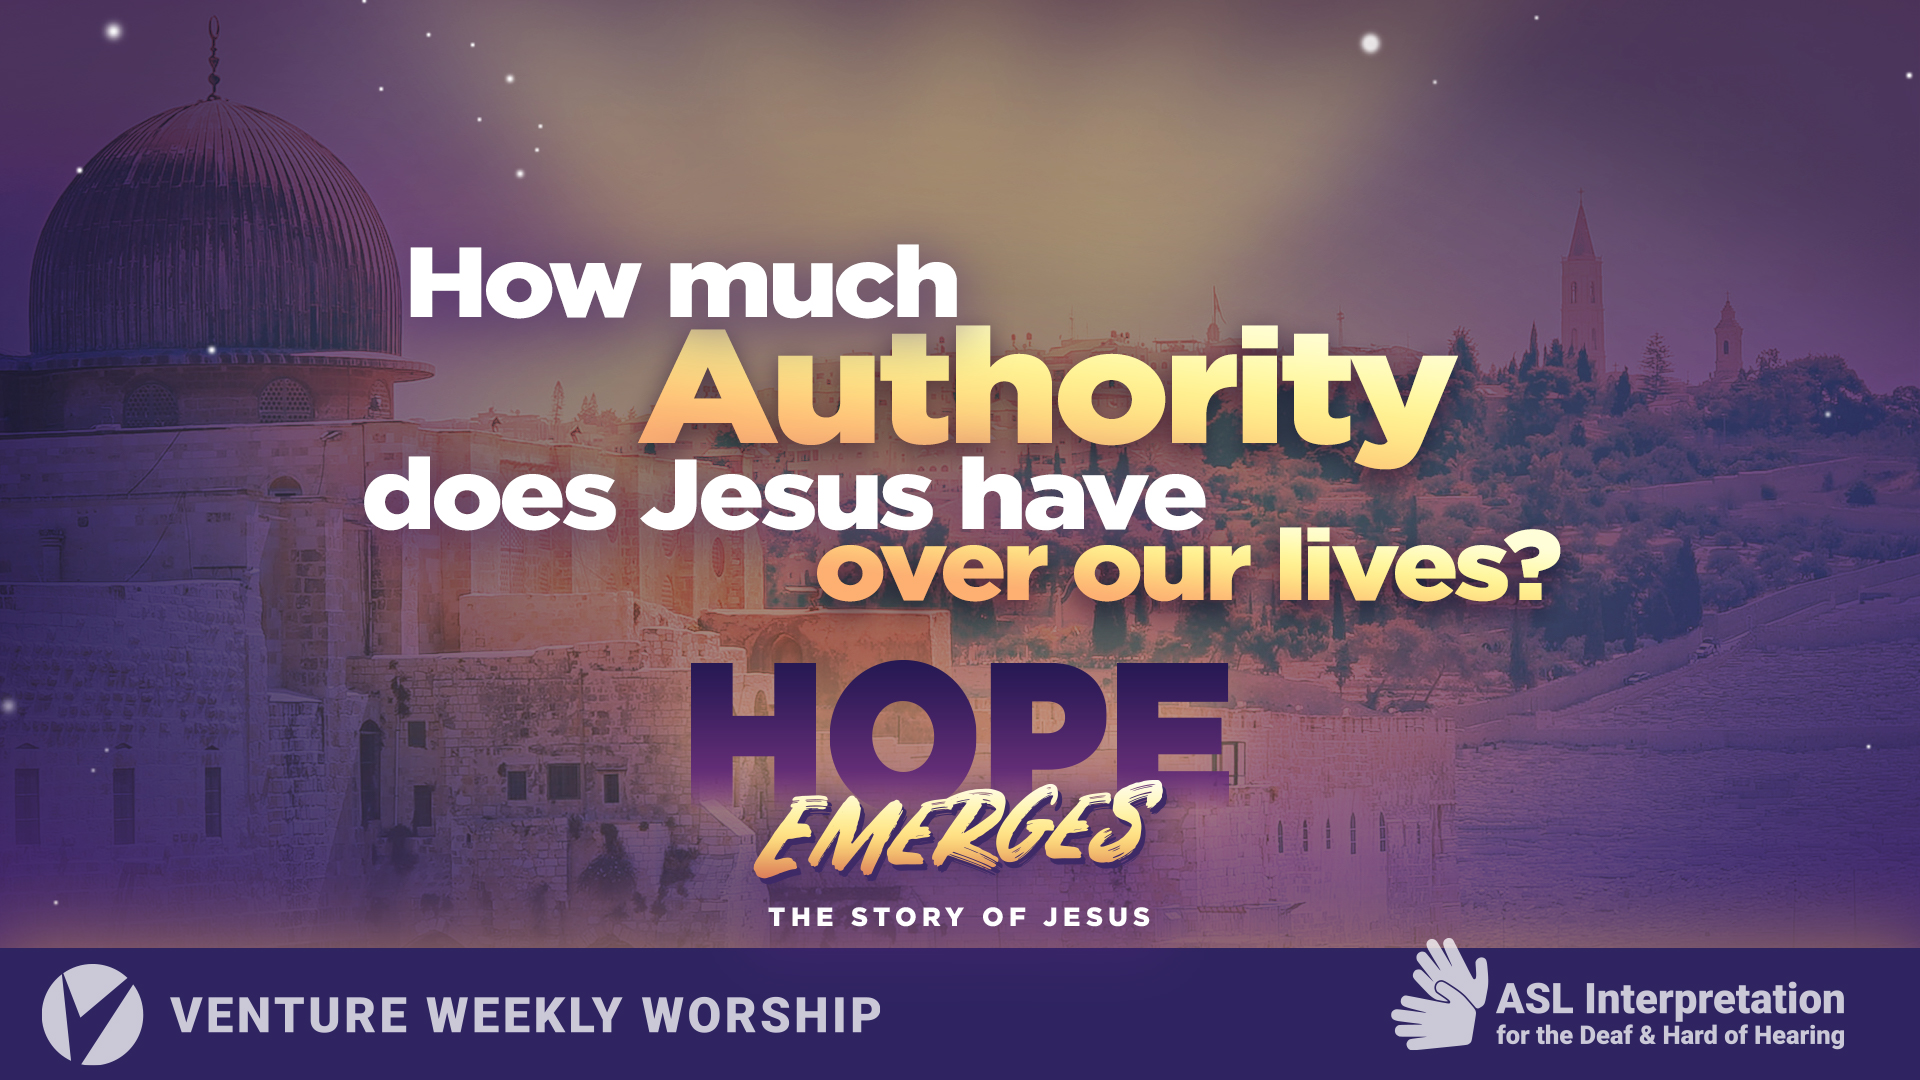 Hope Emerges: All Authority?